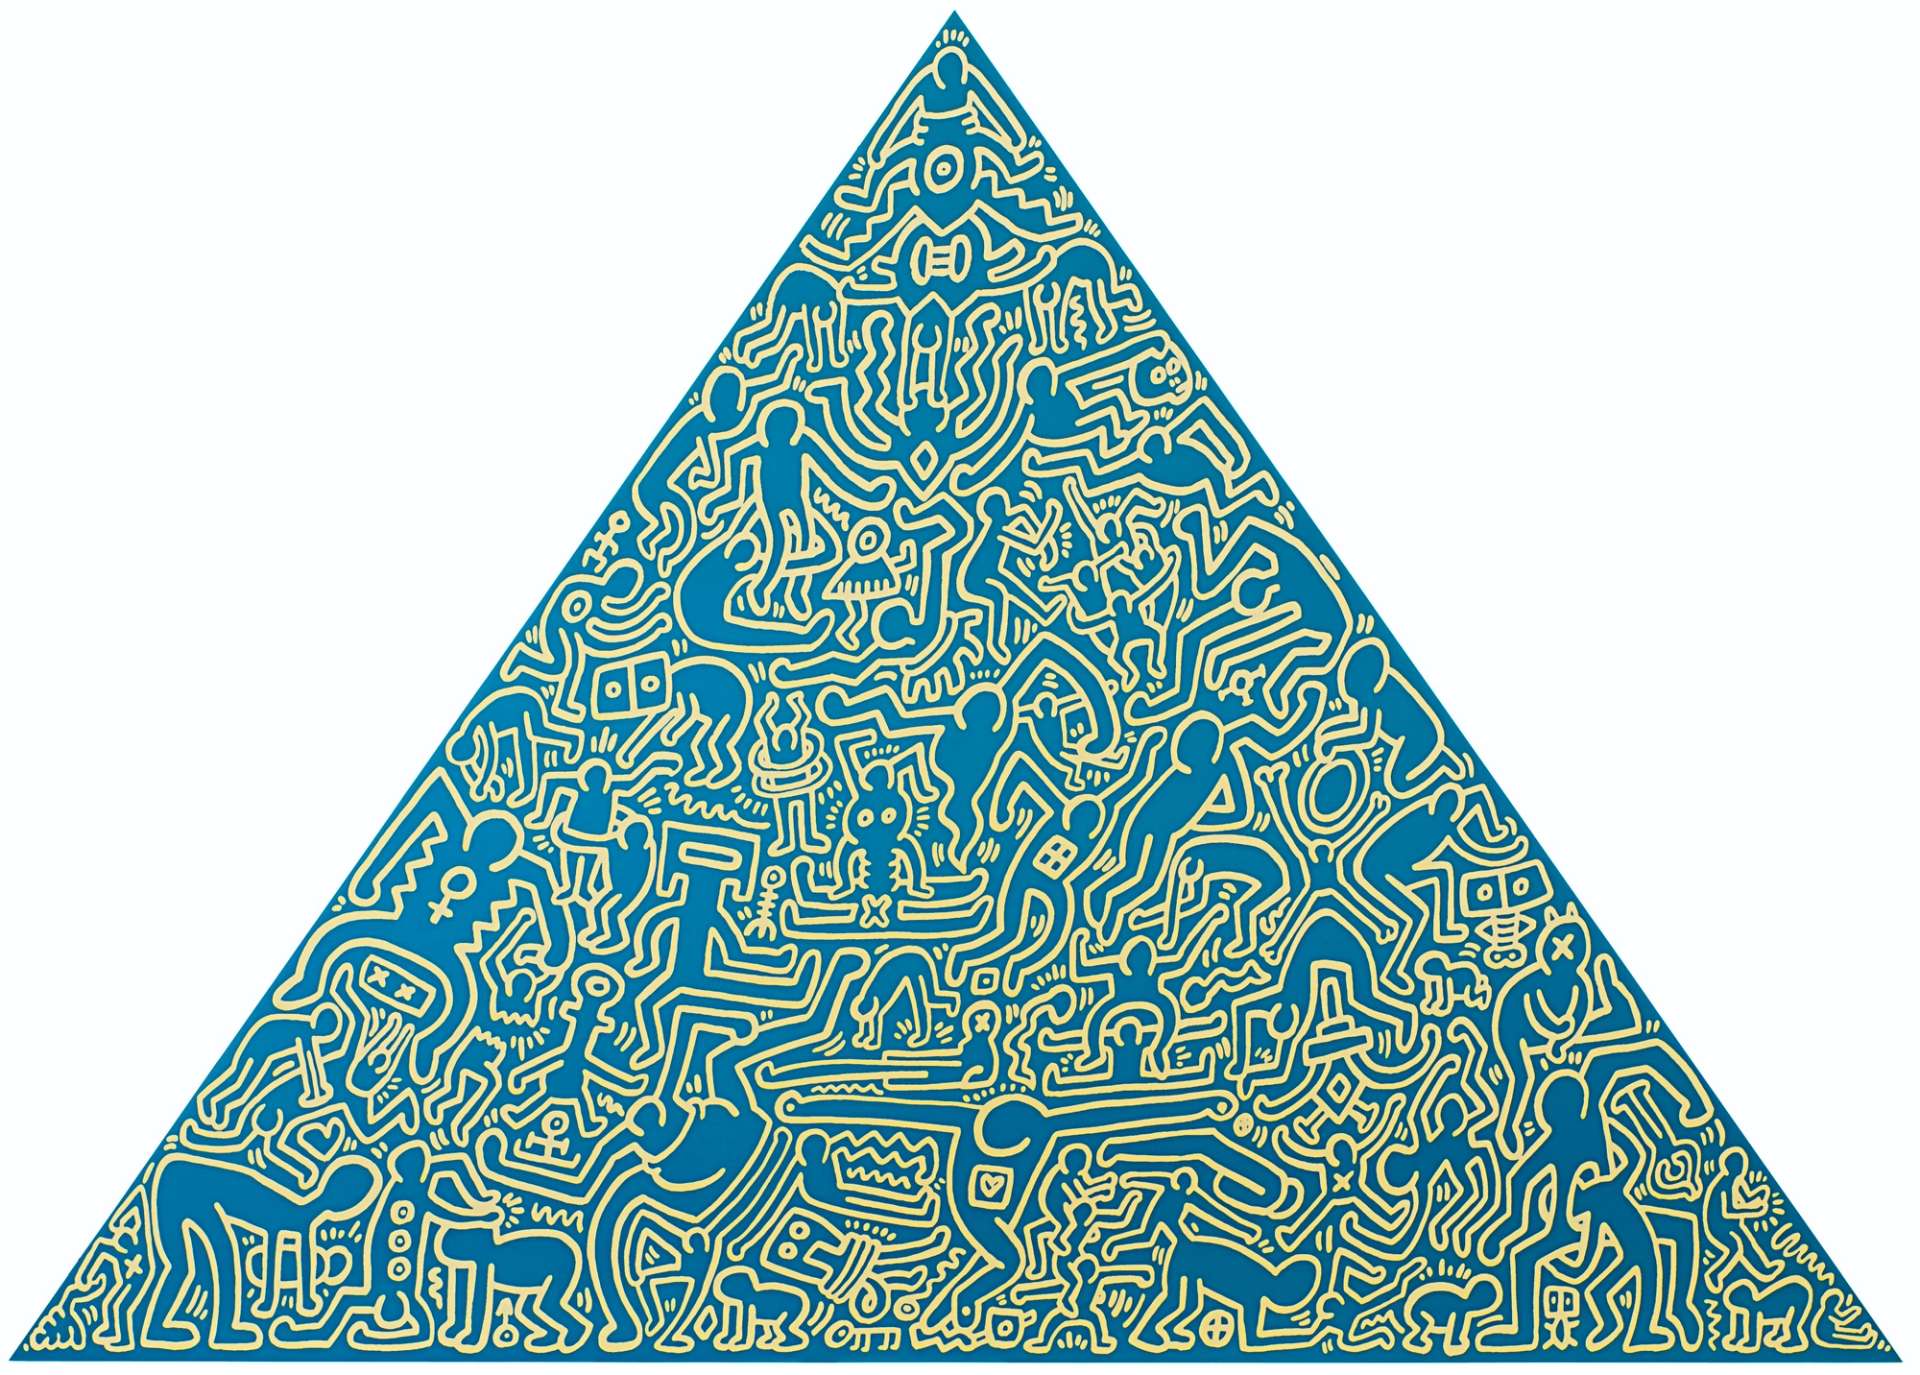 Keith Haring’s Pyramid (blue II). A Pop Art screenprint of a blue triangle with yellow figures in various poses inside of it.